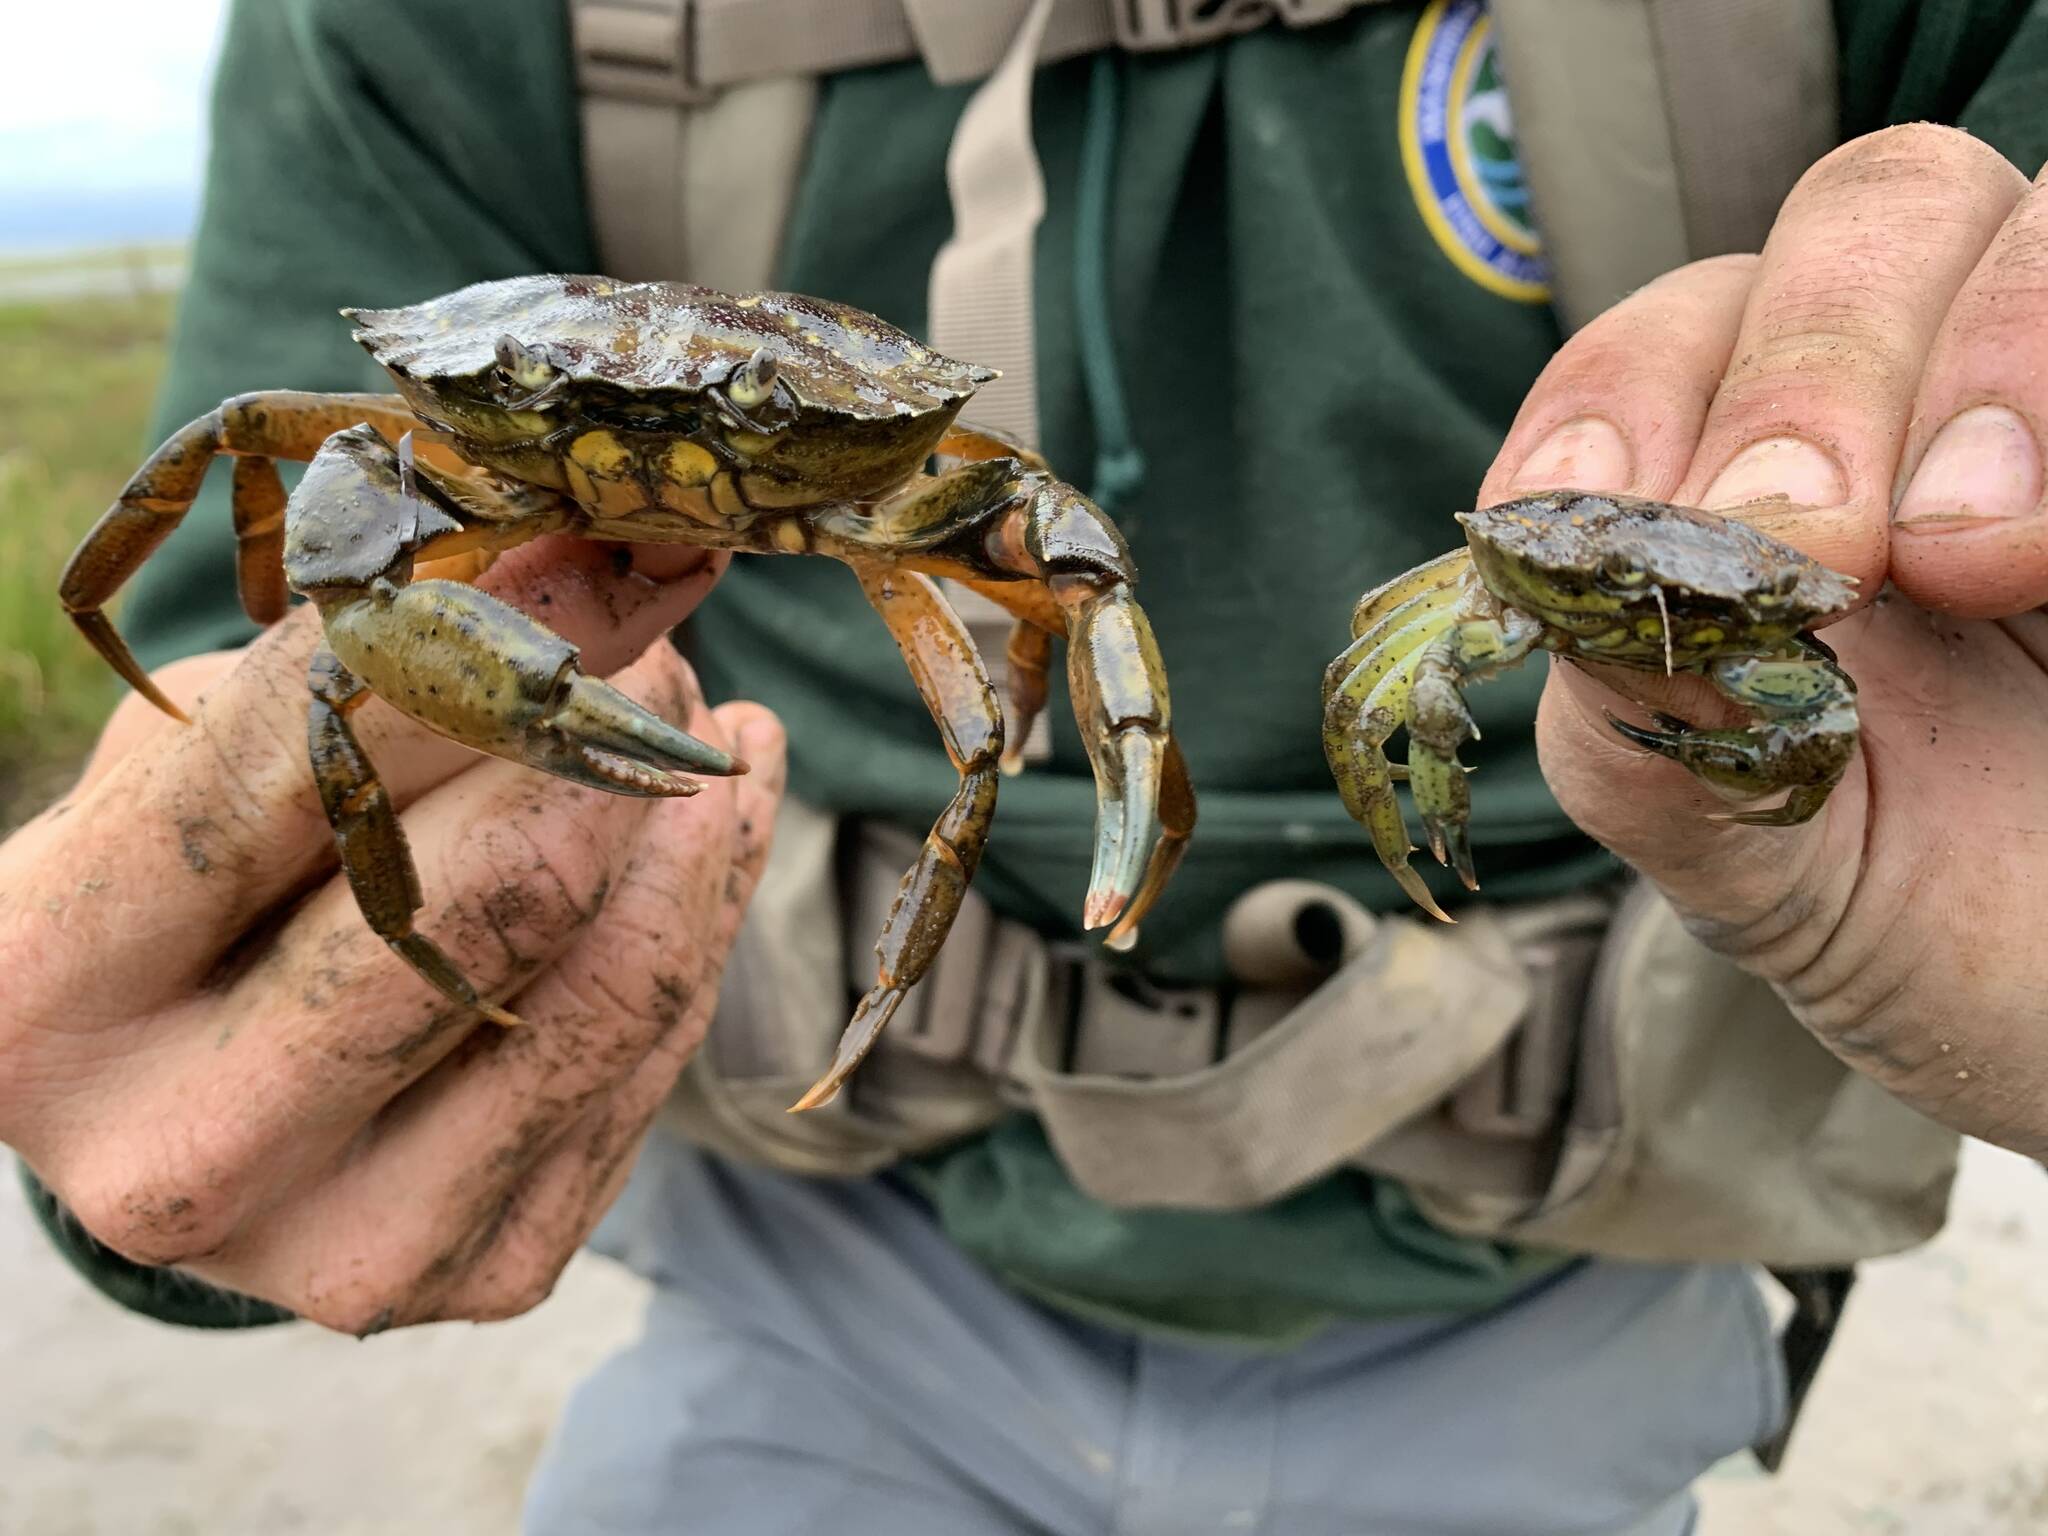 Mature and young European Green Crab comparison at Willapa Bay. Photo courtesy of Chase Gunnell.